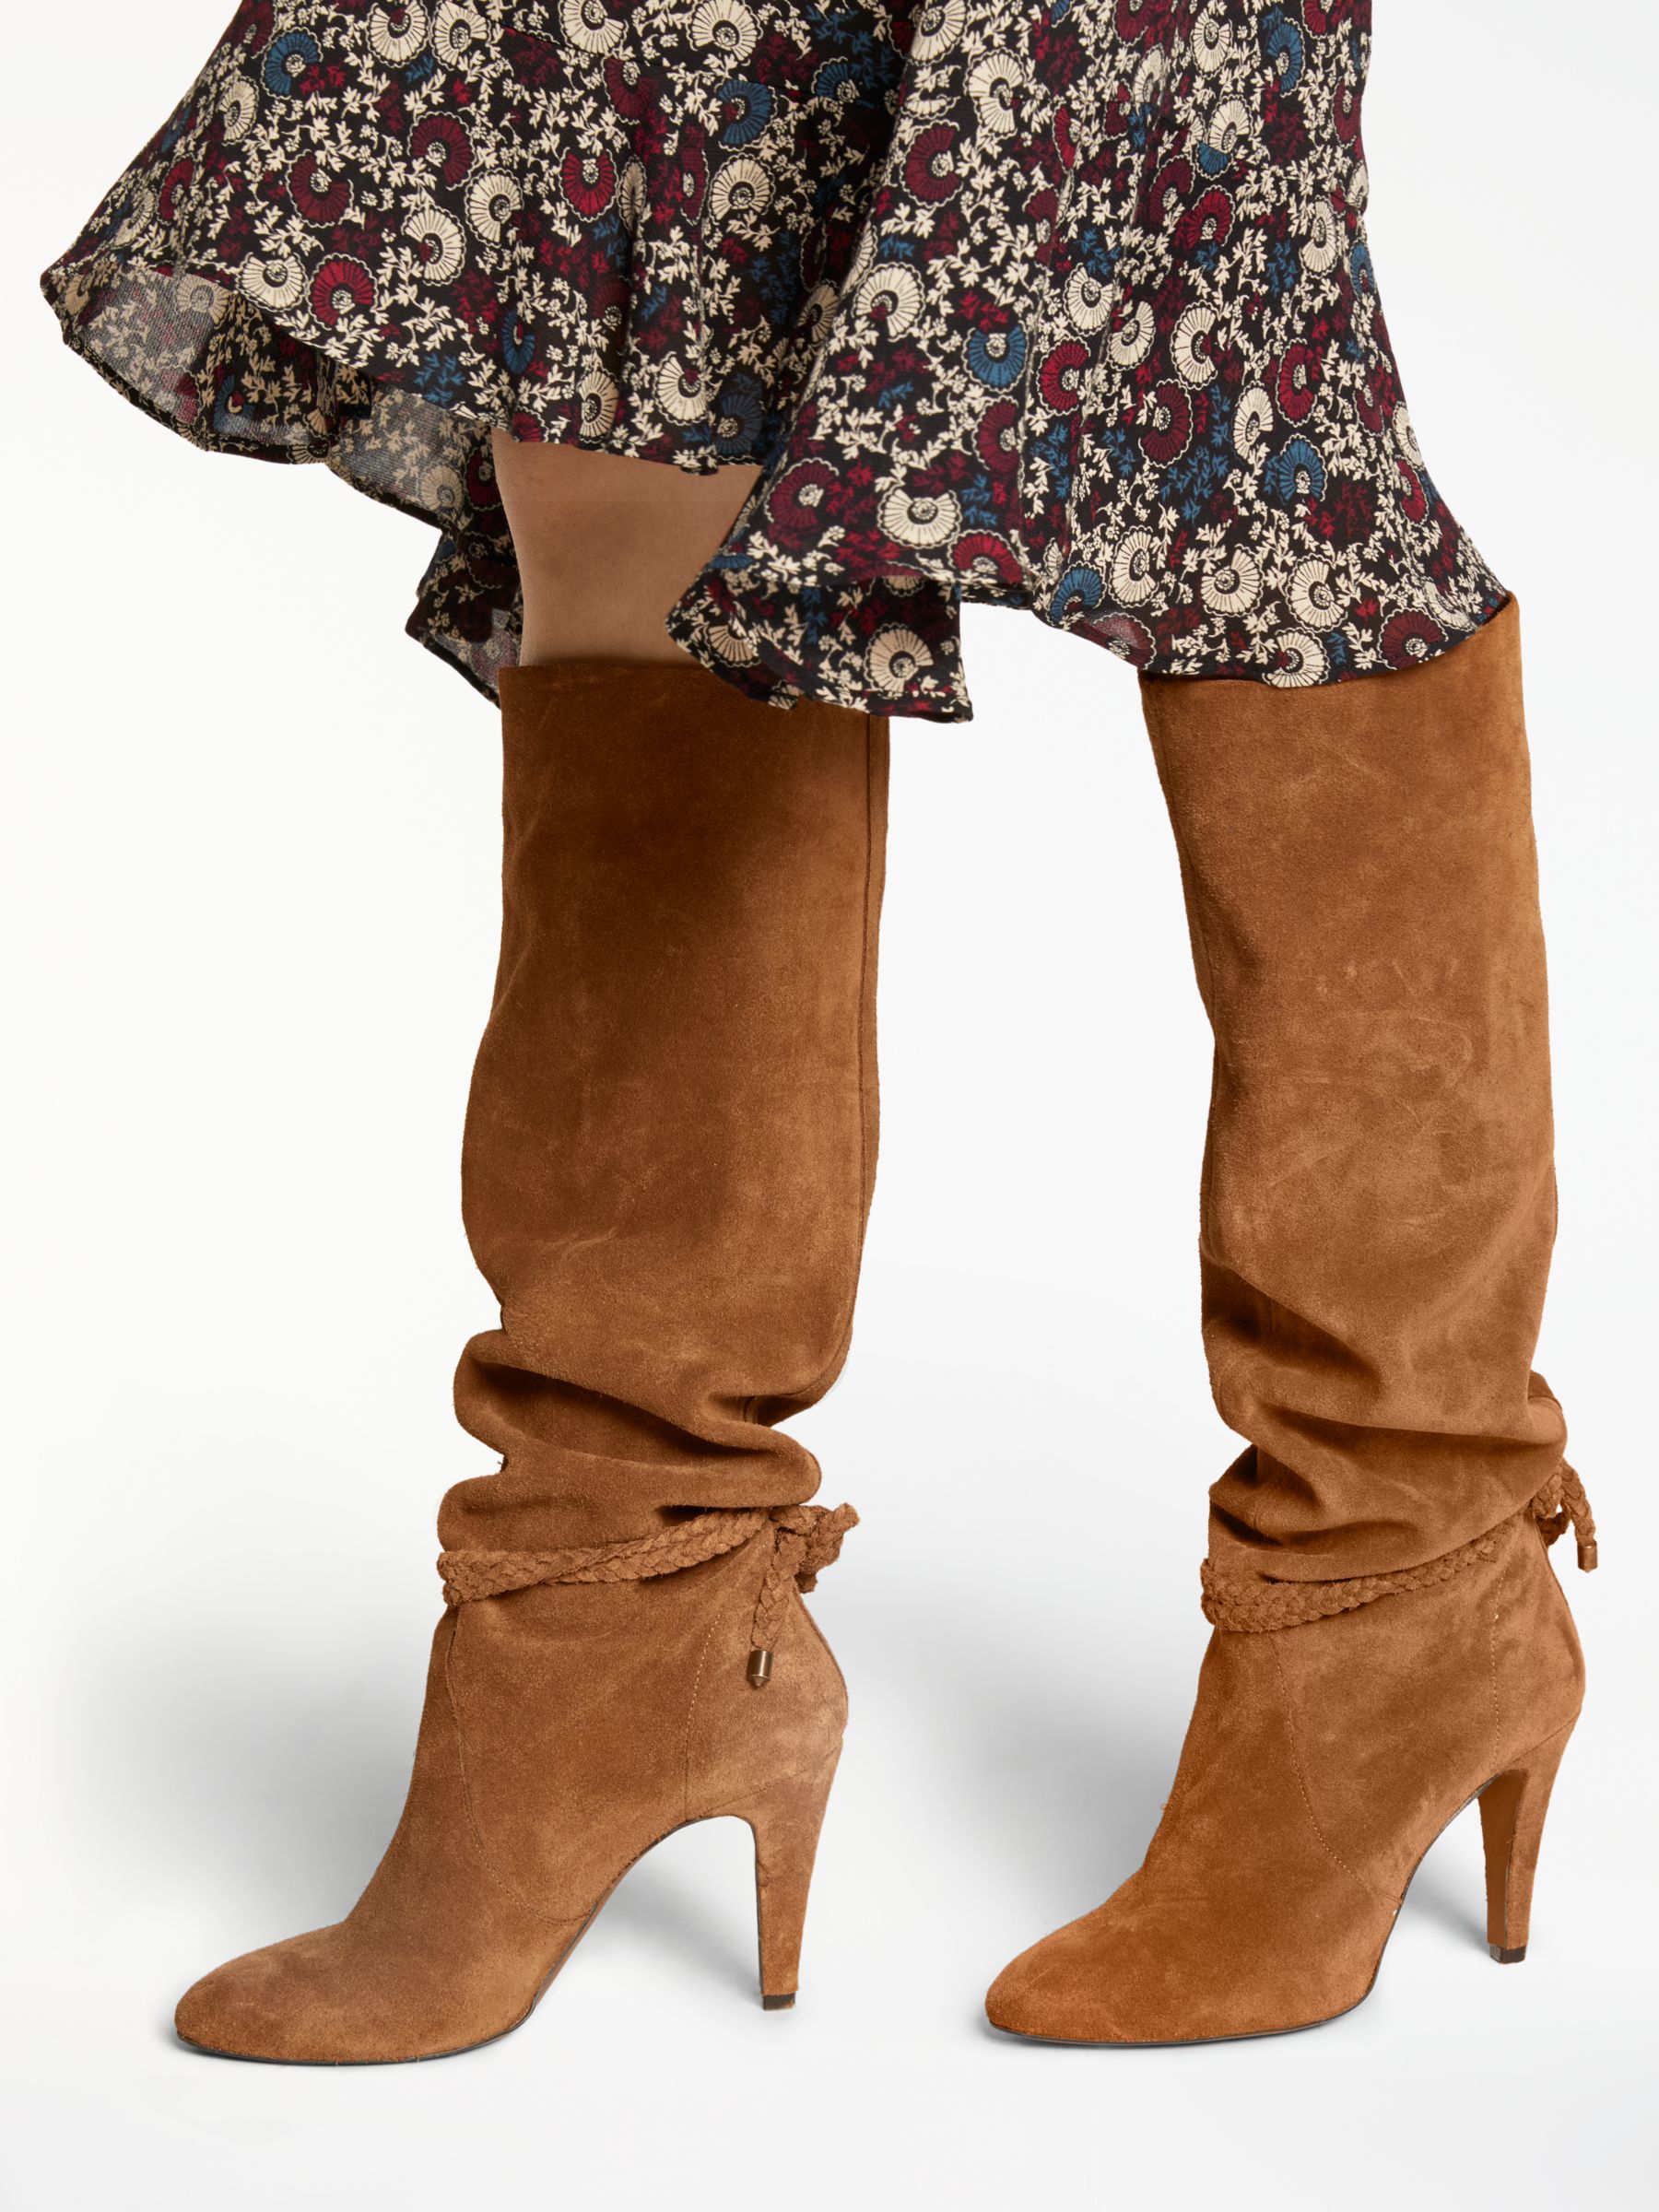 AND/OR Sancia Knee High Slouch Boots, Tan Suede at John Lewis & Partners